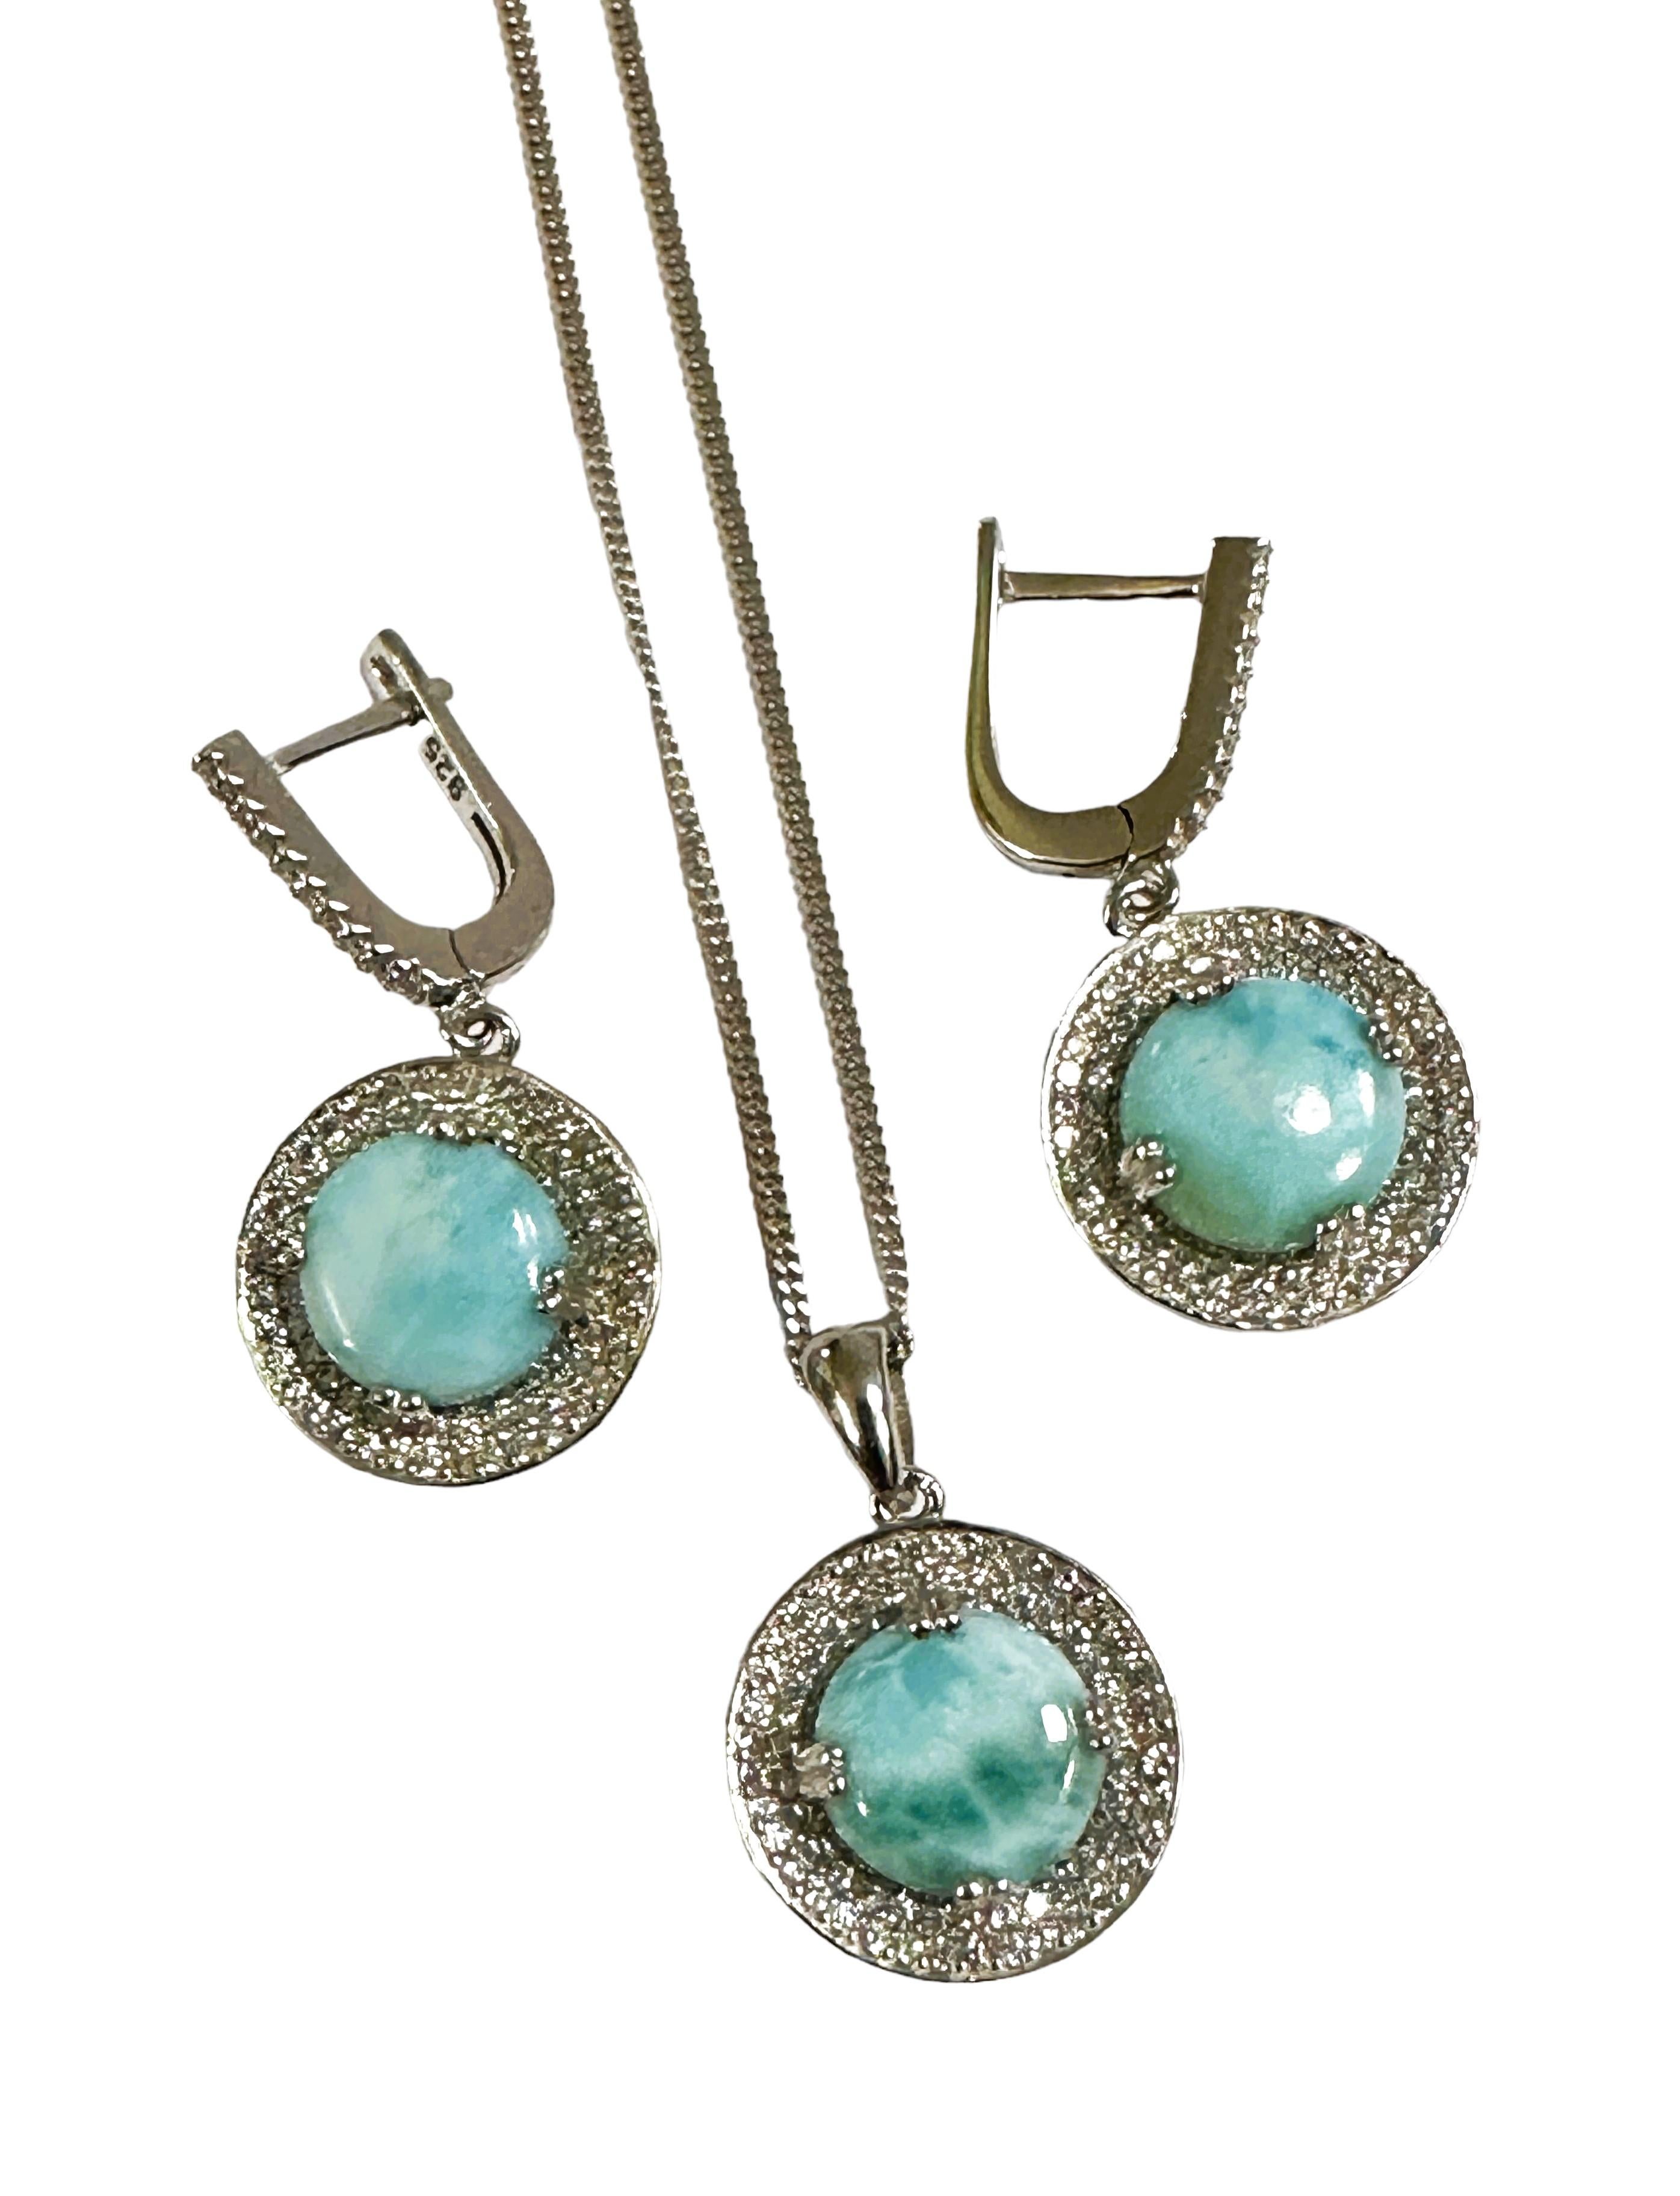 New Sterling Dominican Larimar Necklace and Earrings set For Sale 1